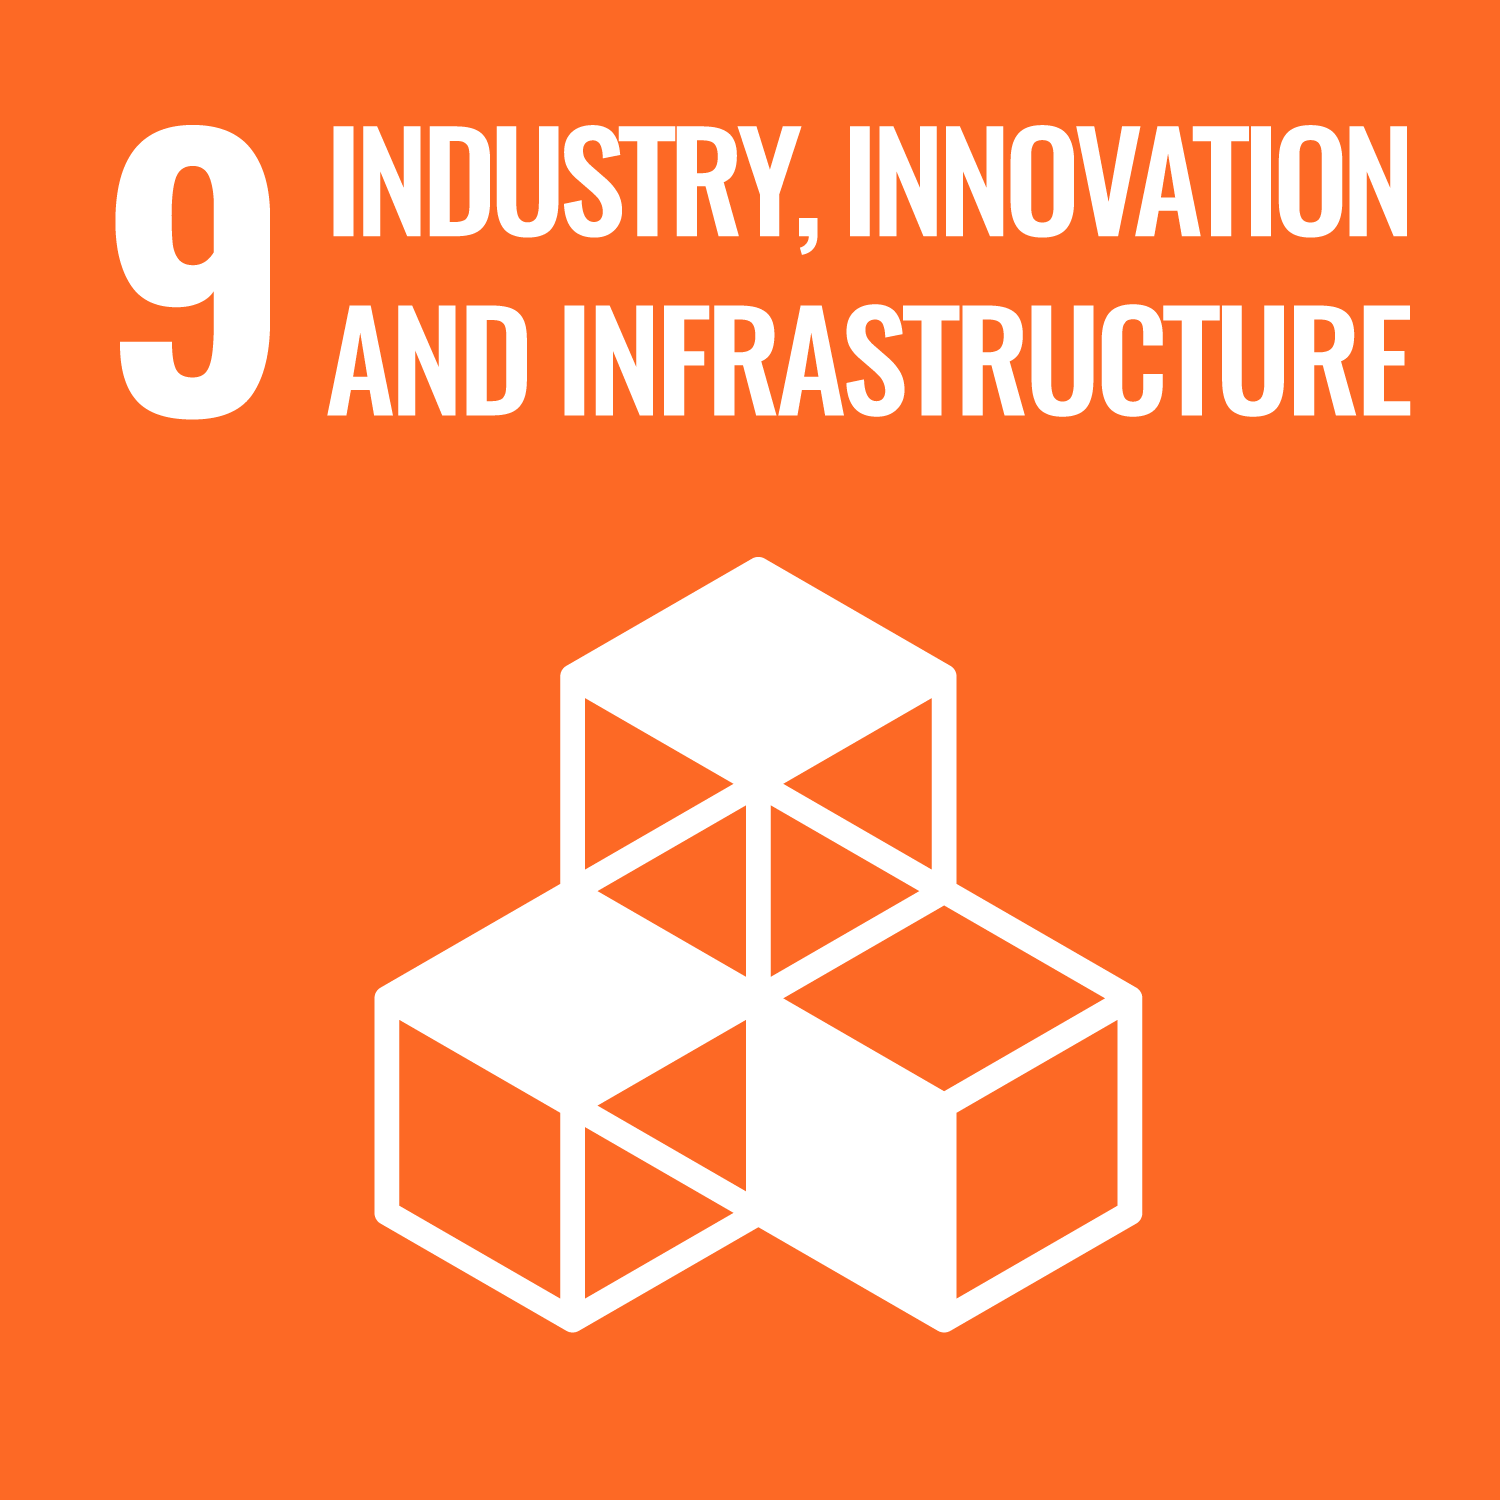 SDG 09 - Industry, Innovation and Infrastructure